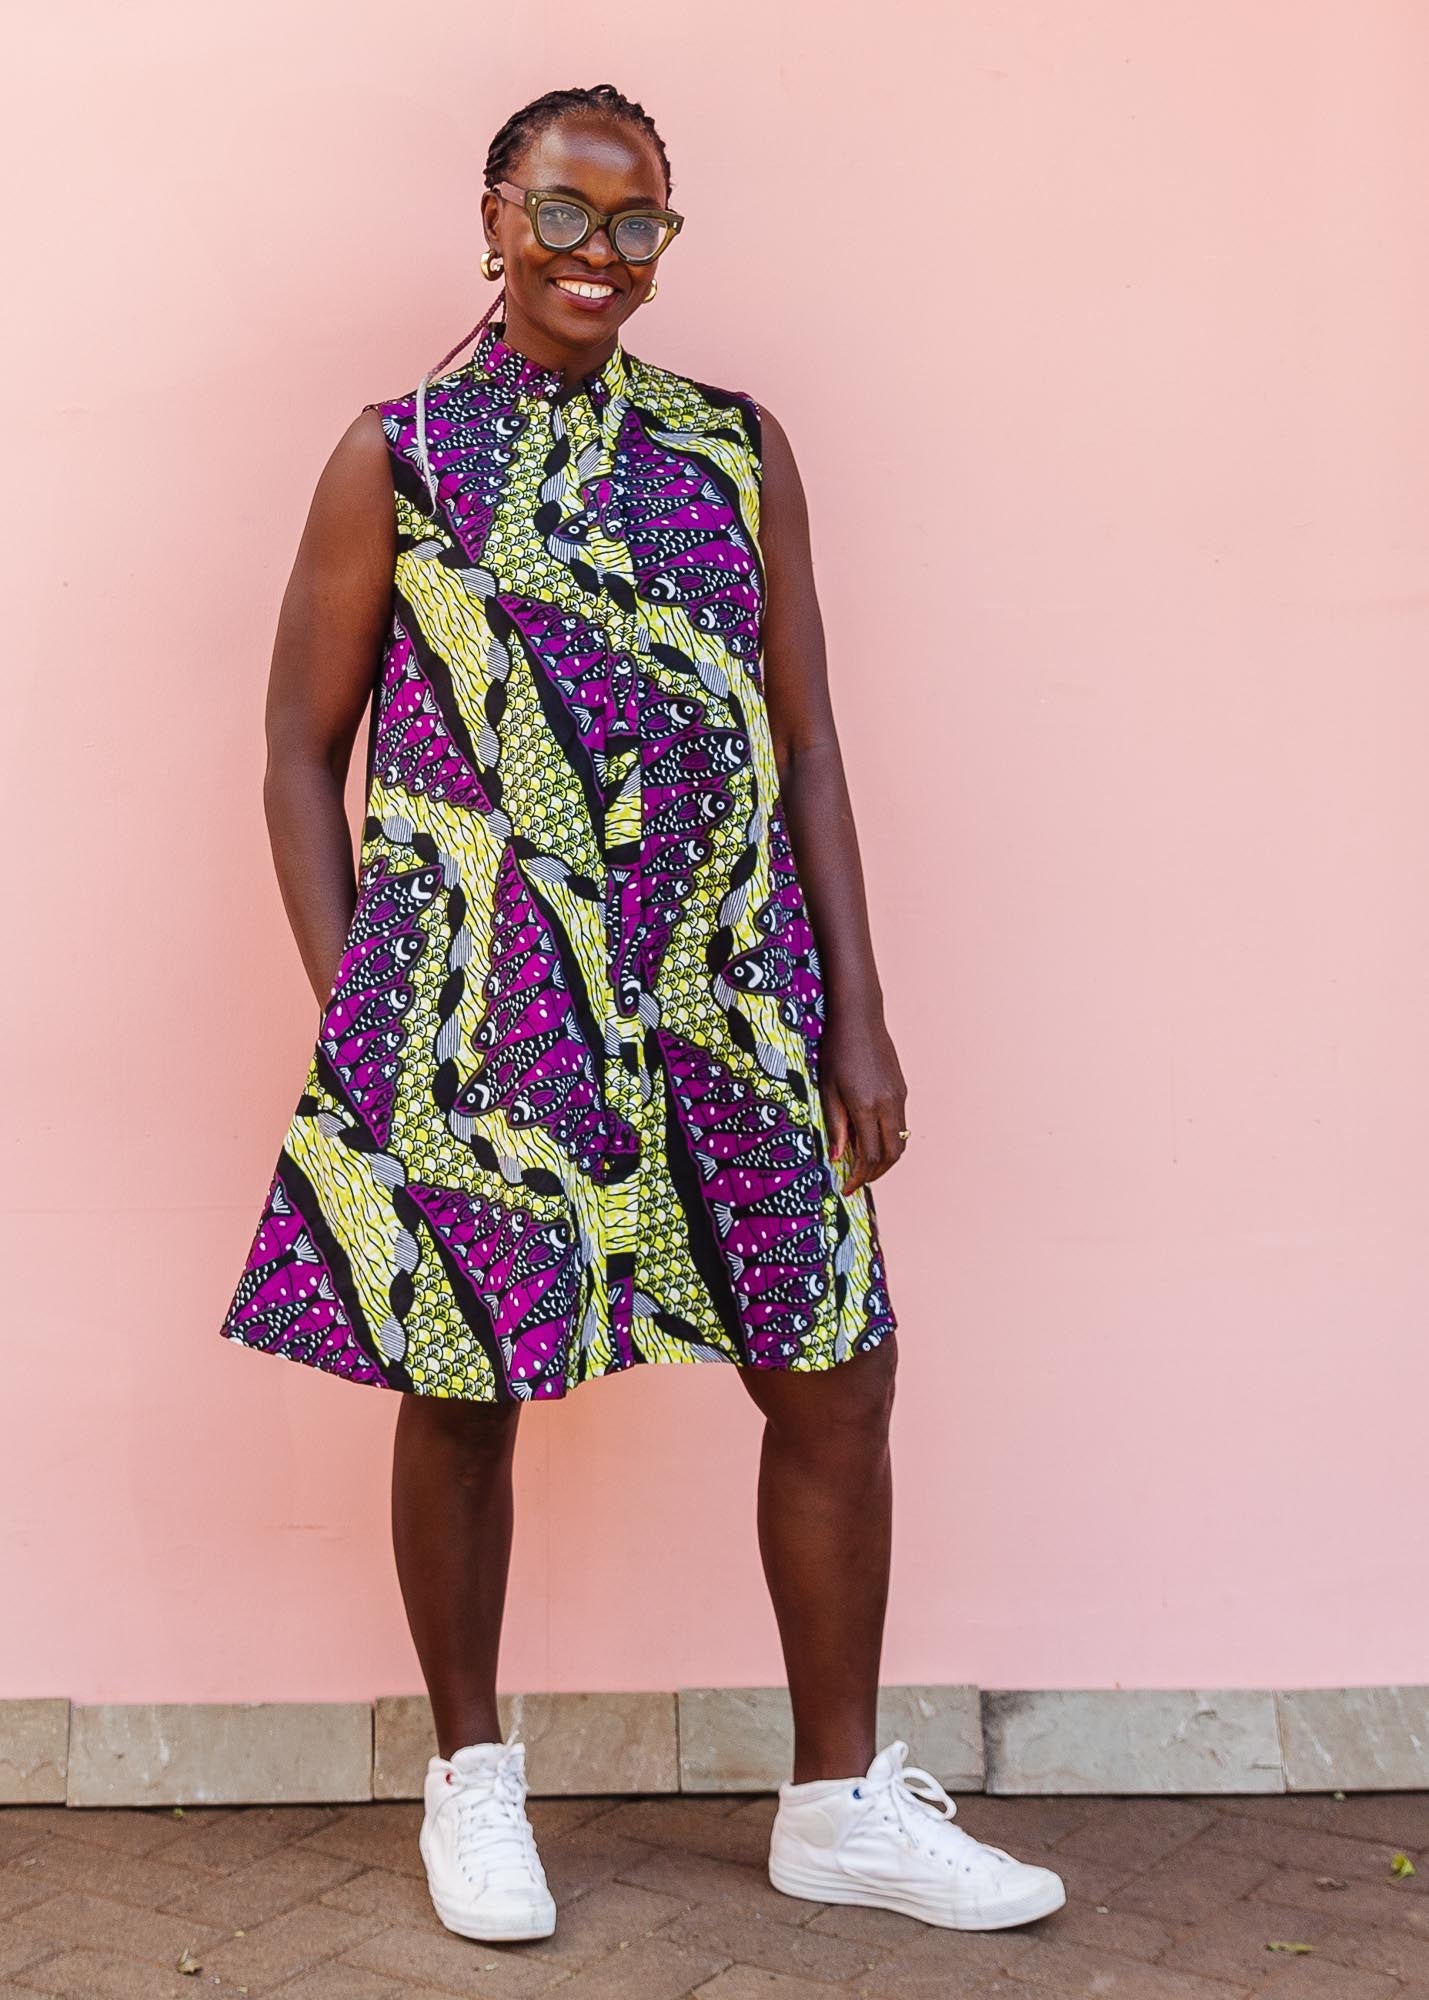 The model is wearing yellow-green dress with purple, black, white fish print 